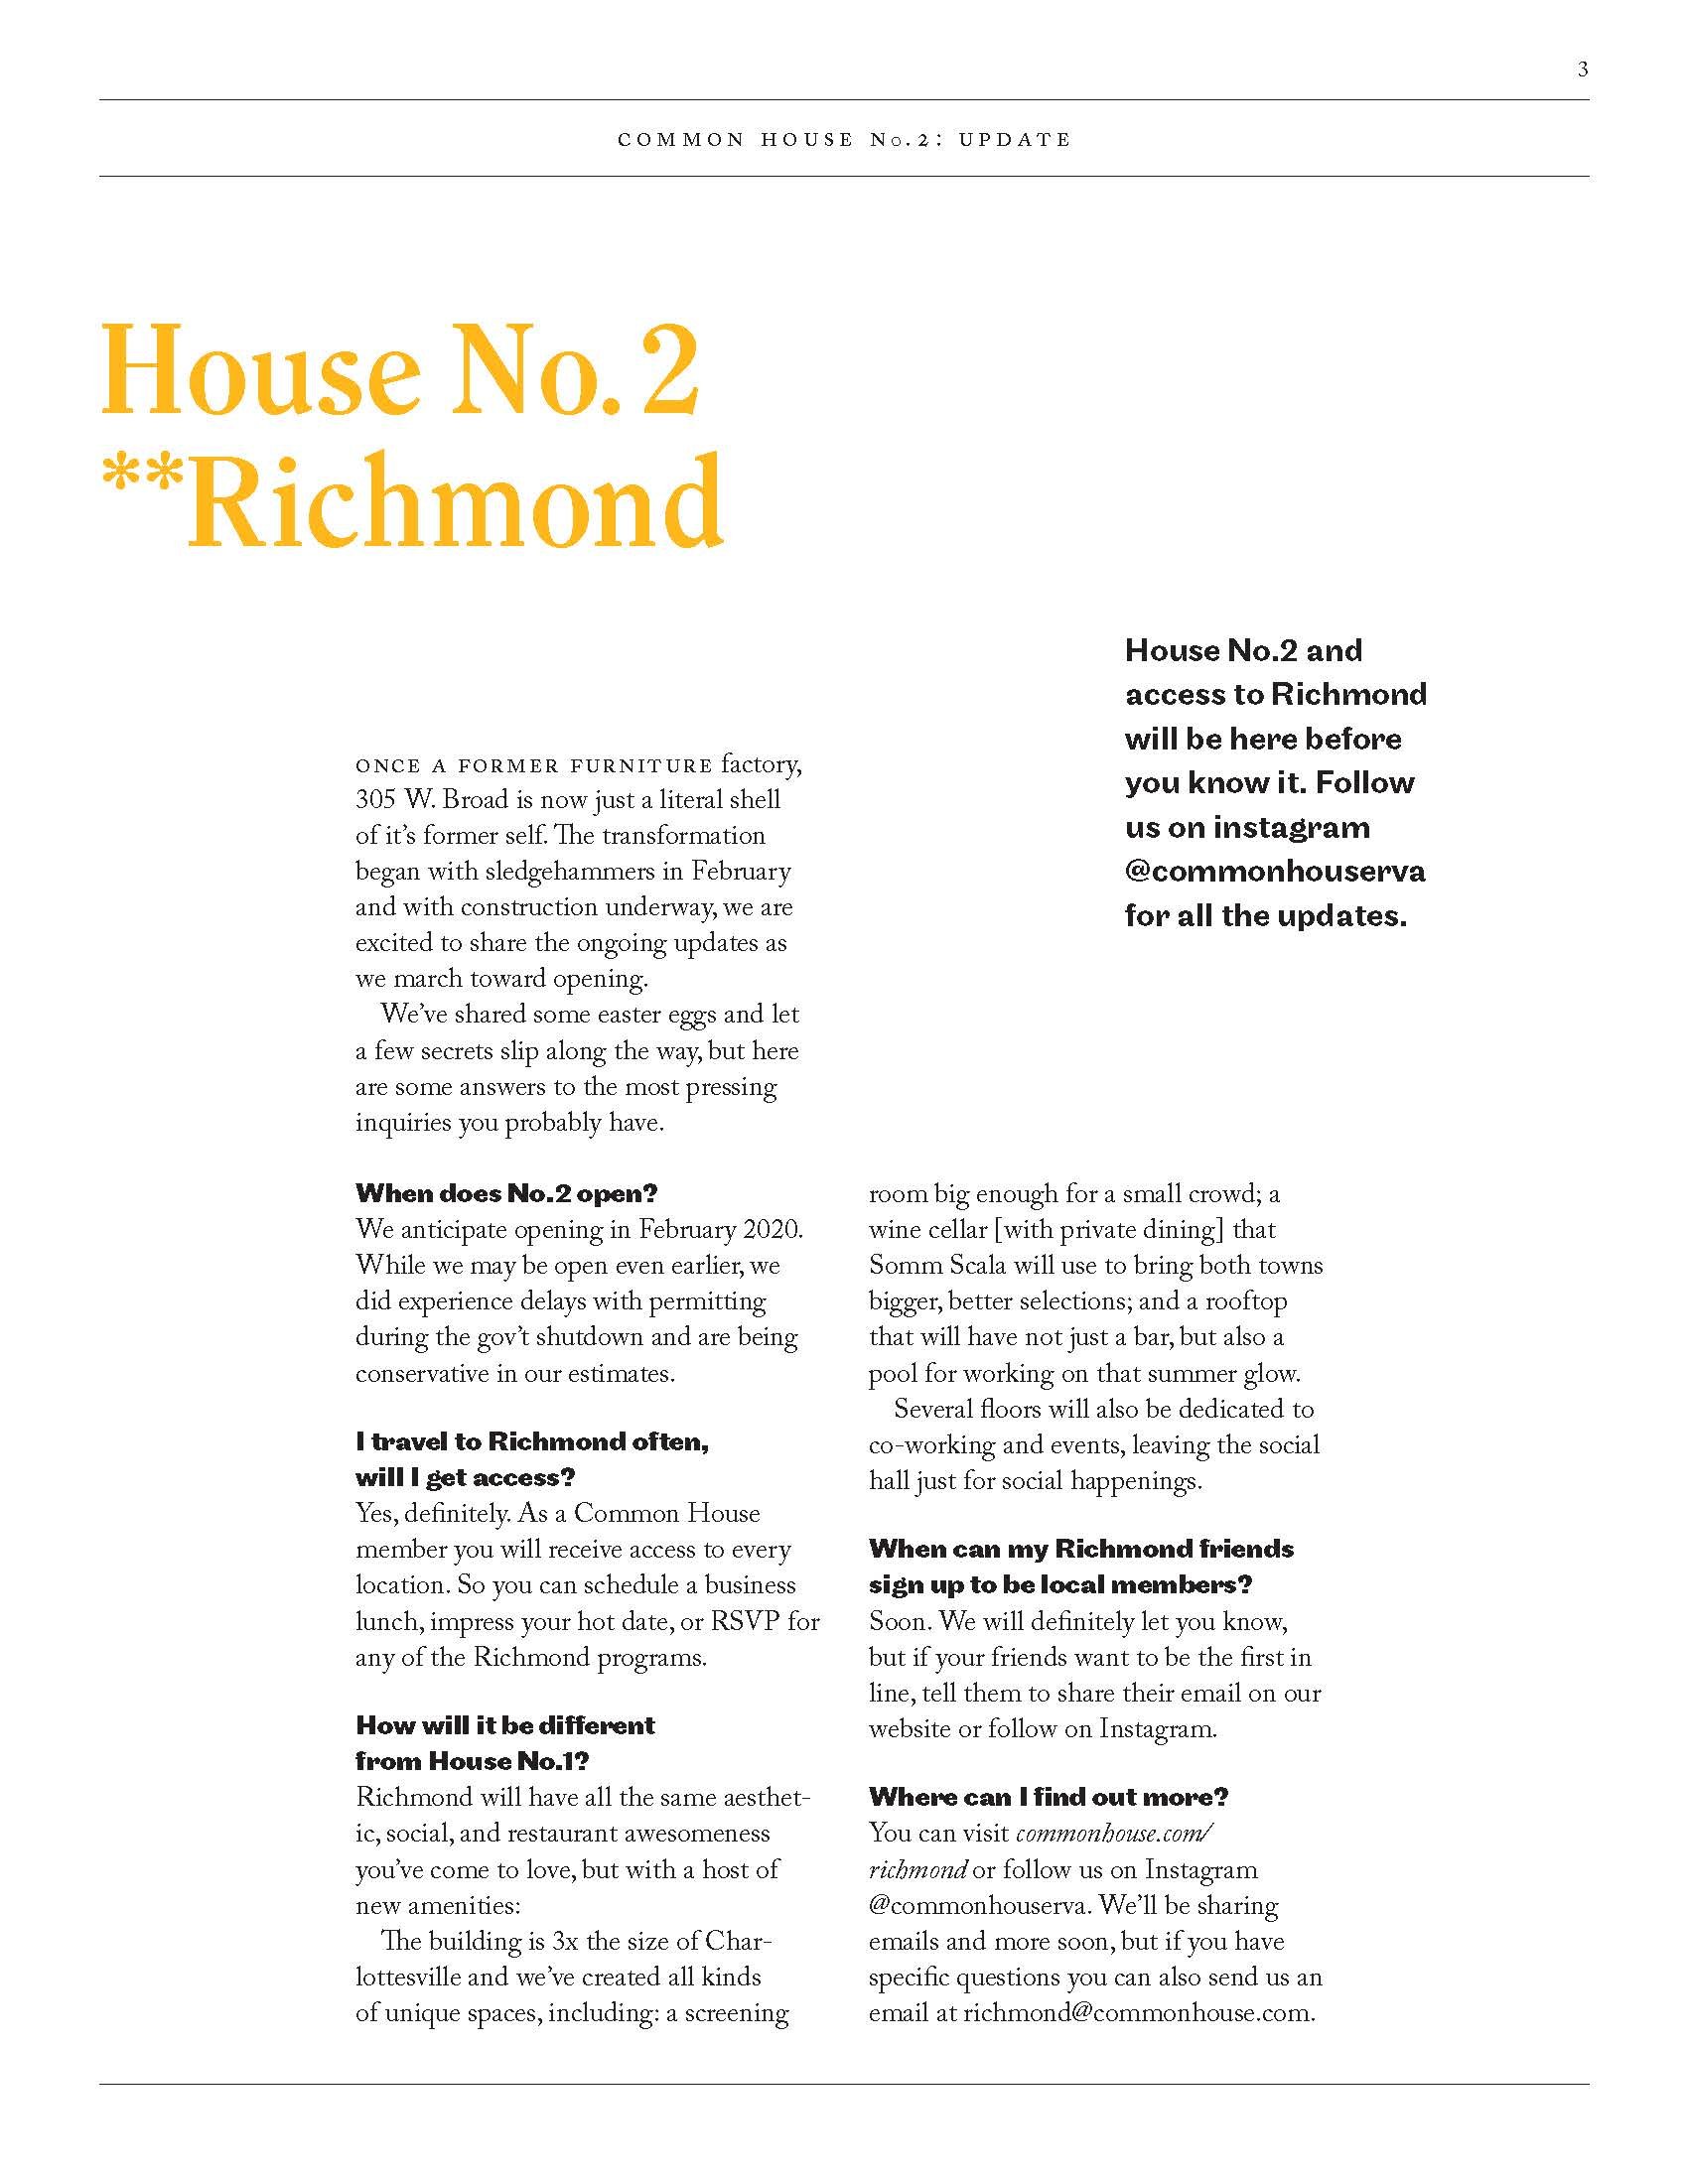 4 Common-House-newsletter-19-03_Feb19-Press2_Page_05.jpg